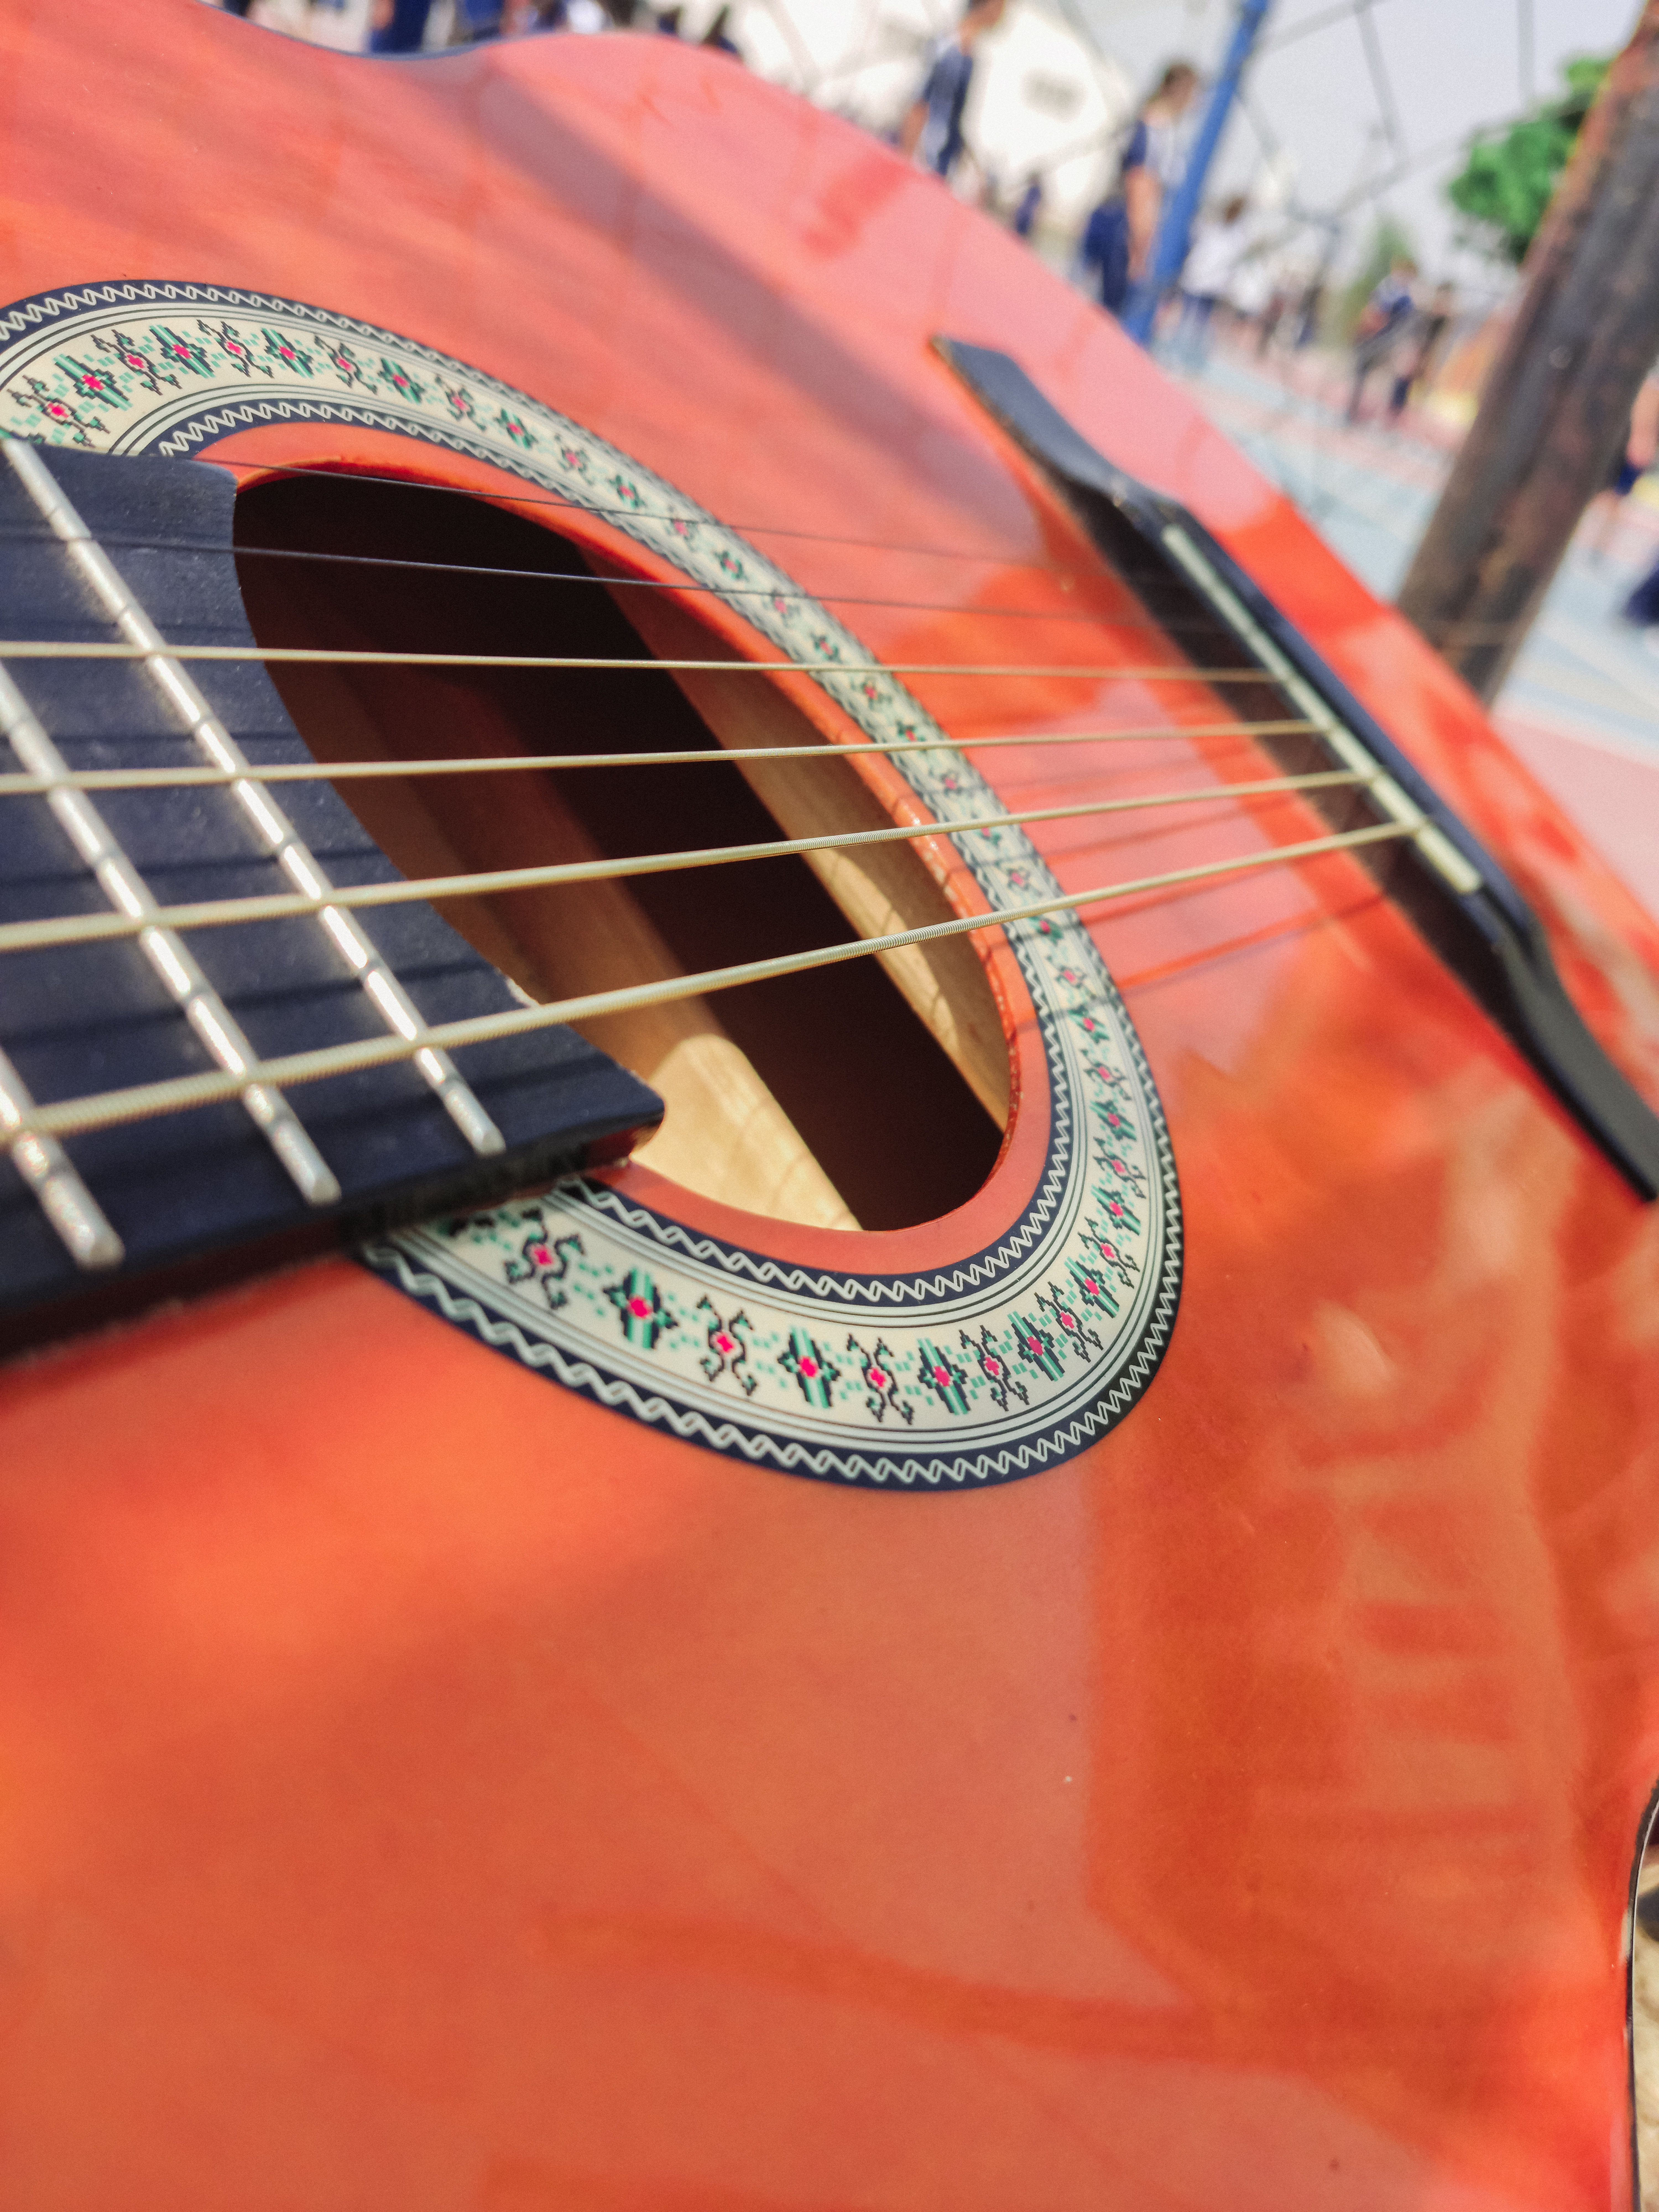 A close up of a guitar by Hermano006